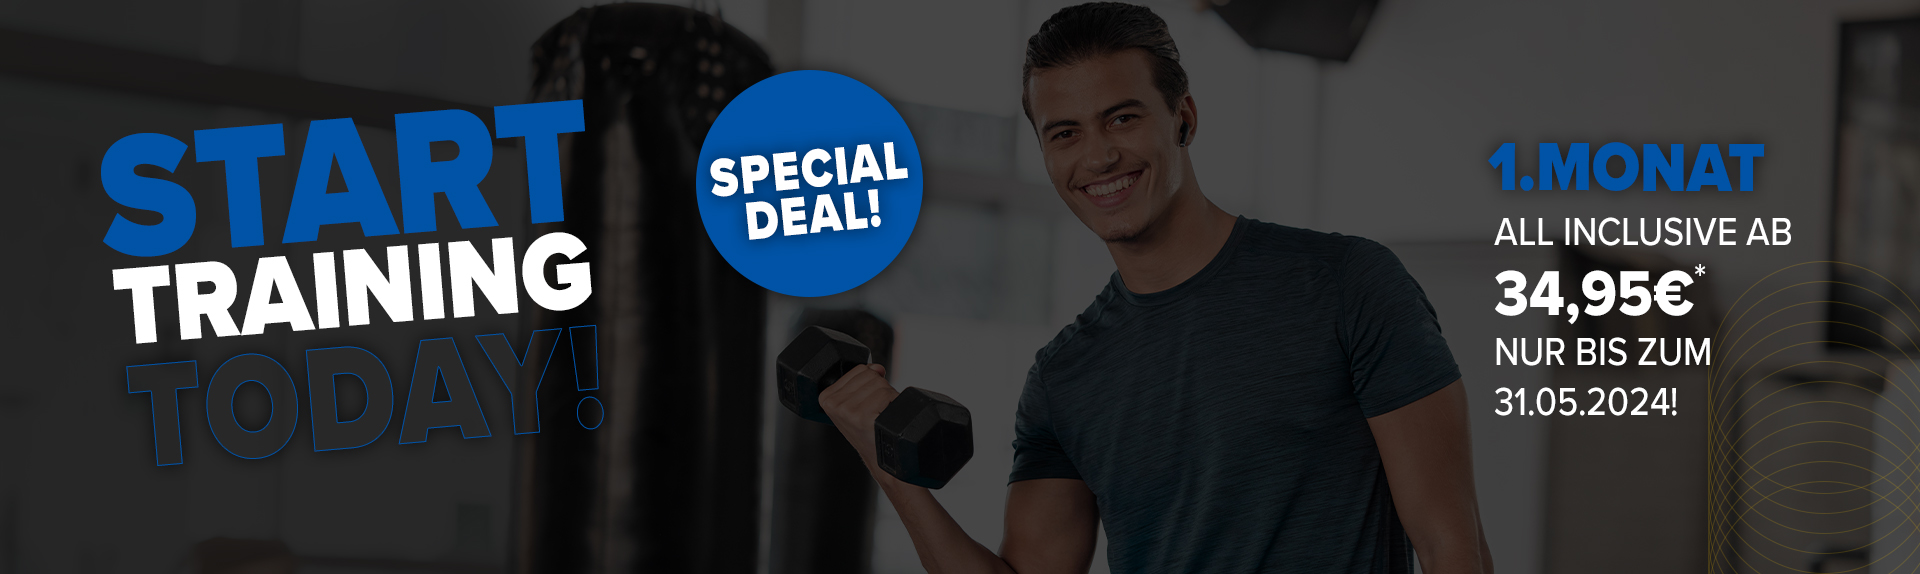 Special Deal - Aktion